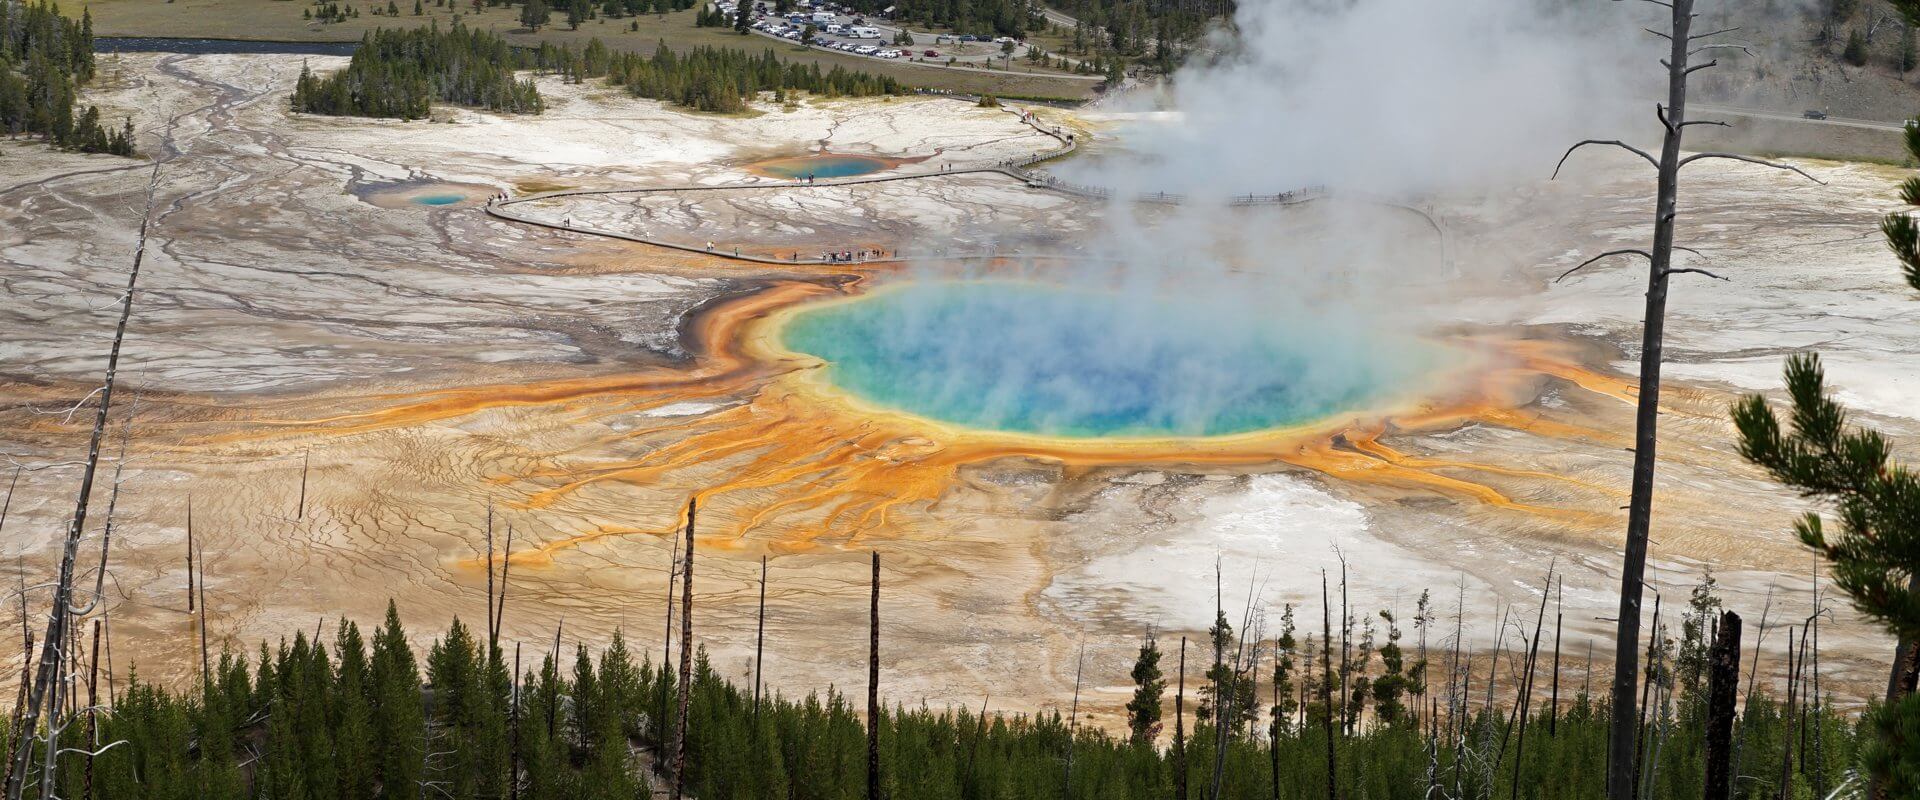 Yellowstone National Park: unsere Highlights